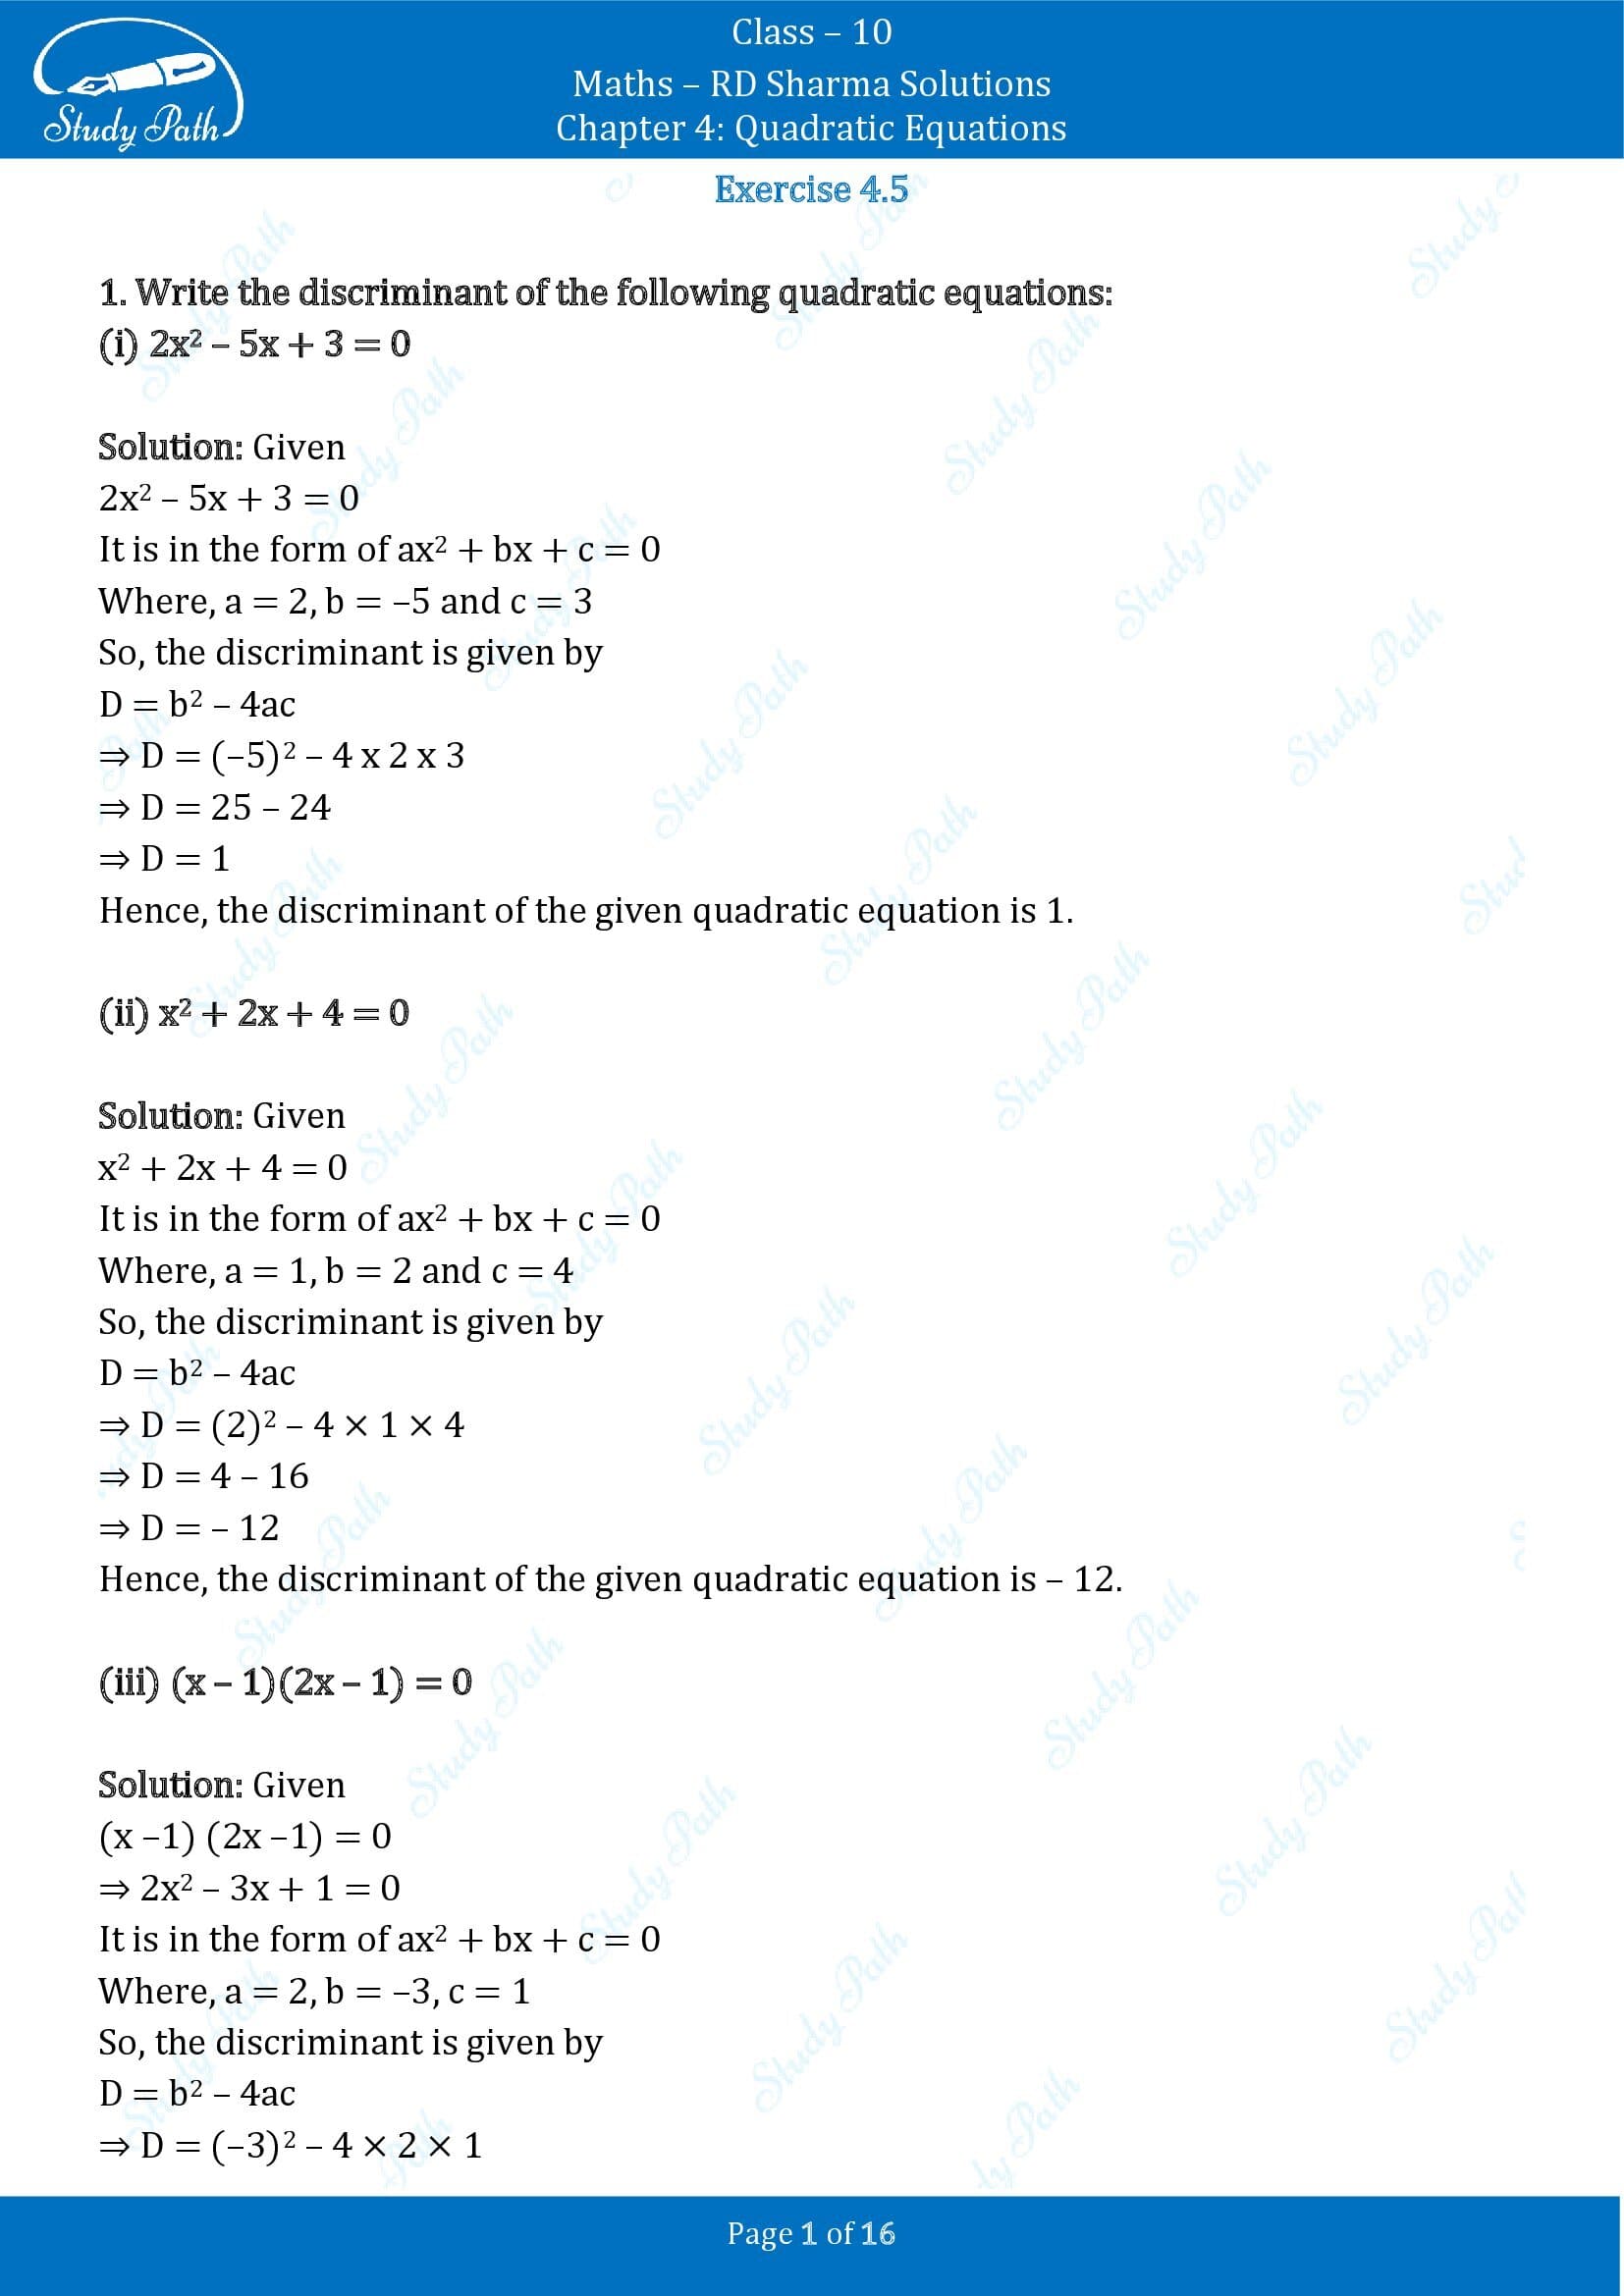 RD Sharma Solutions Class 10 Chapter 4 Quadratic Equations Exercise 4.5 00001